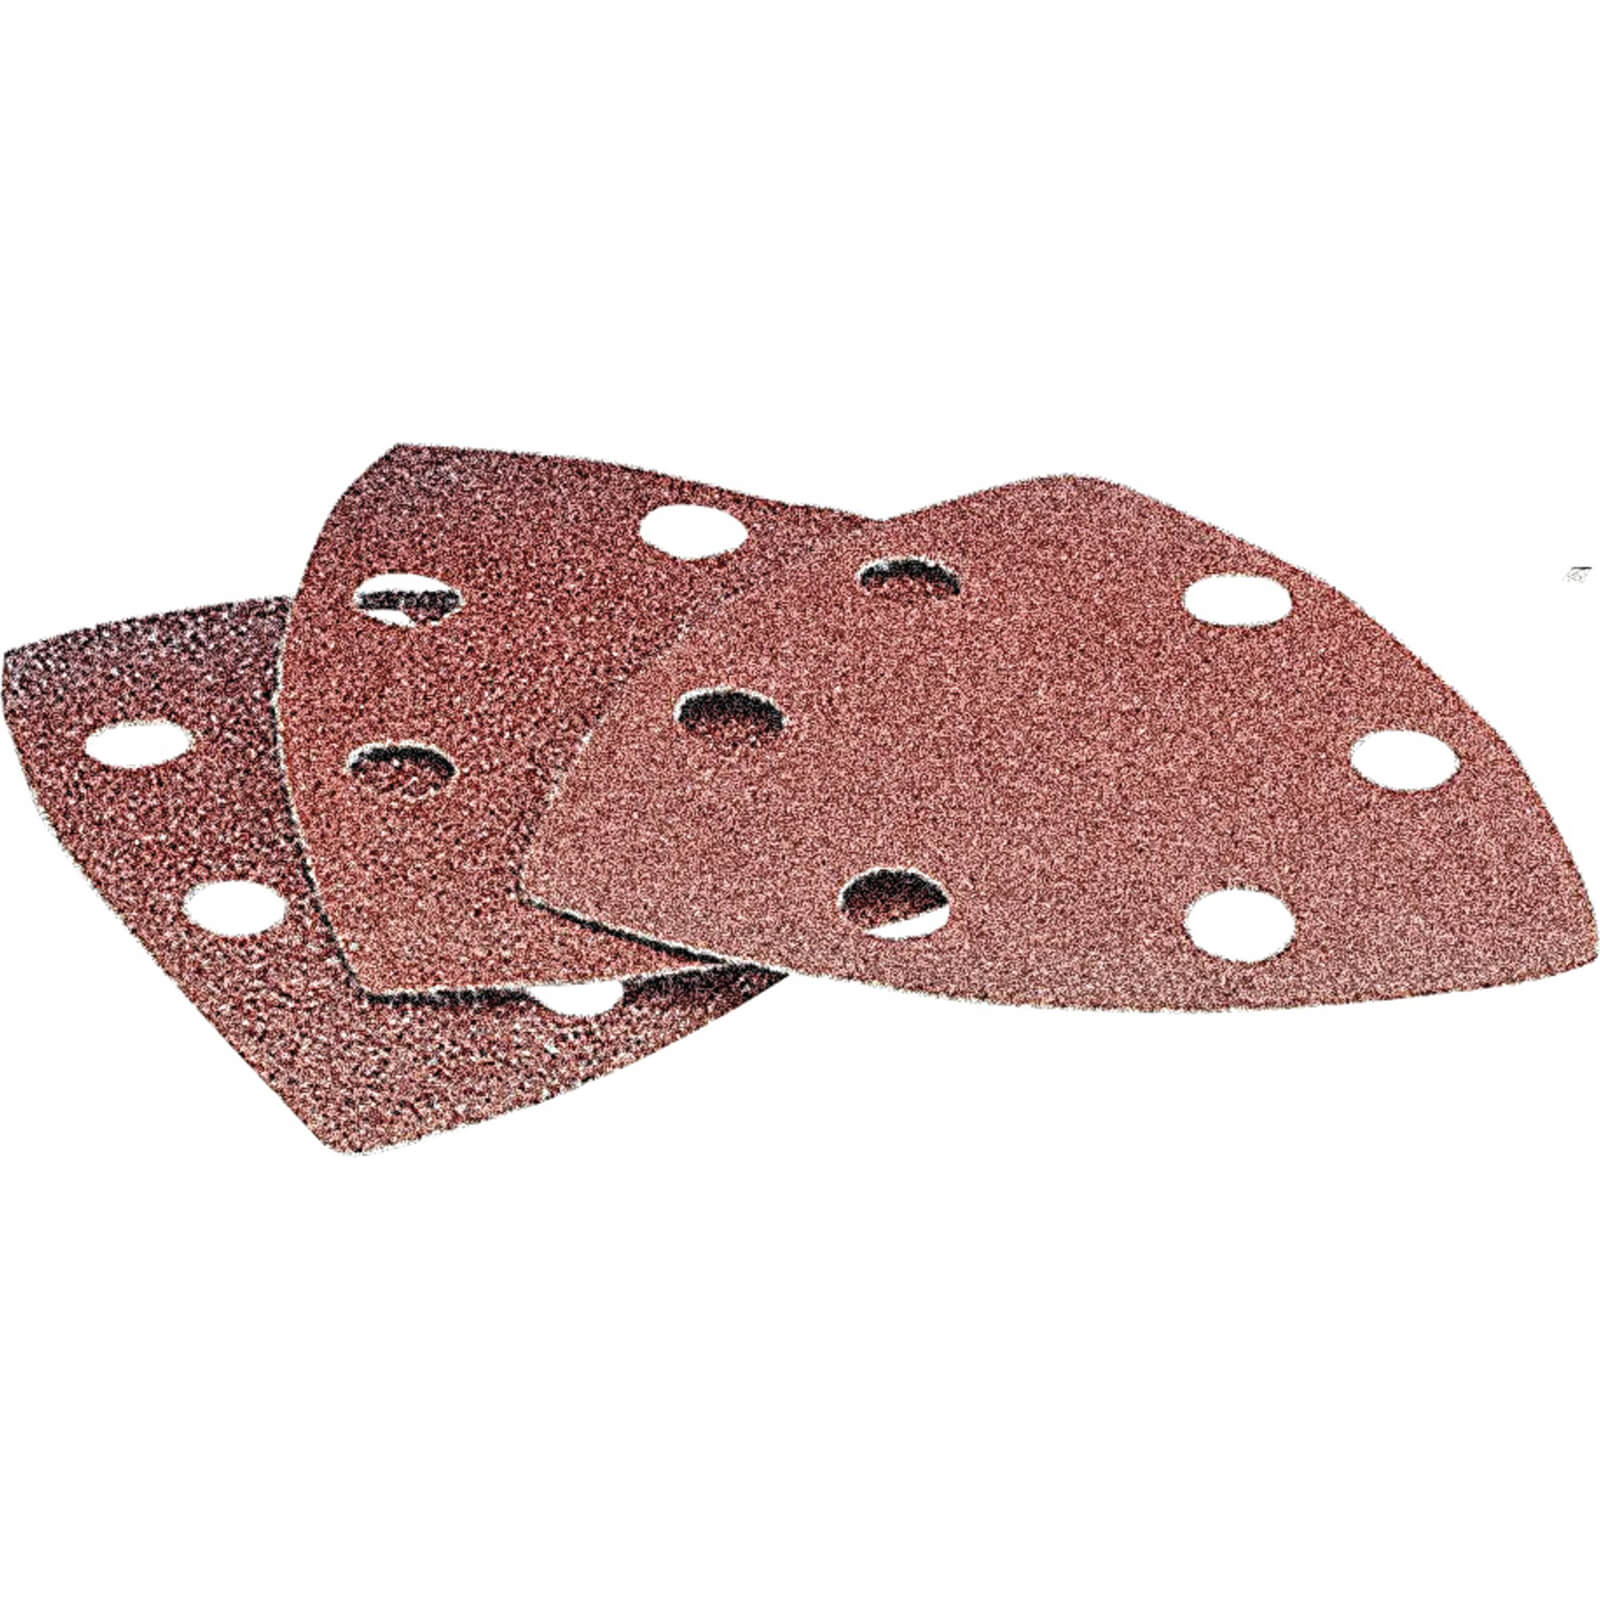 Image of Draper Punched Delta Sanding Sheets 23666 Oscillating Multi Tool Assorted Grit Pack of 6